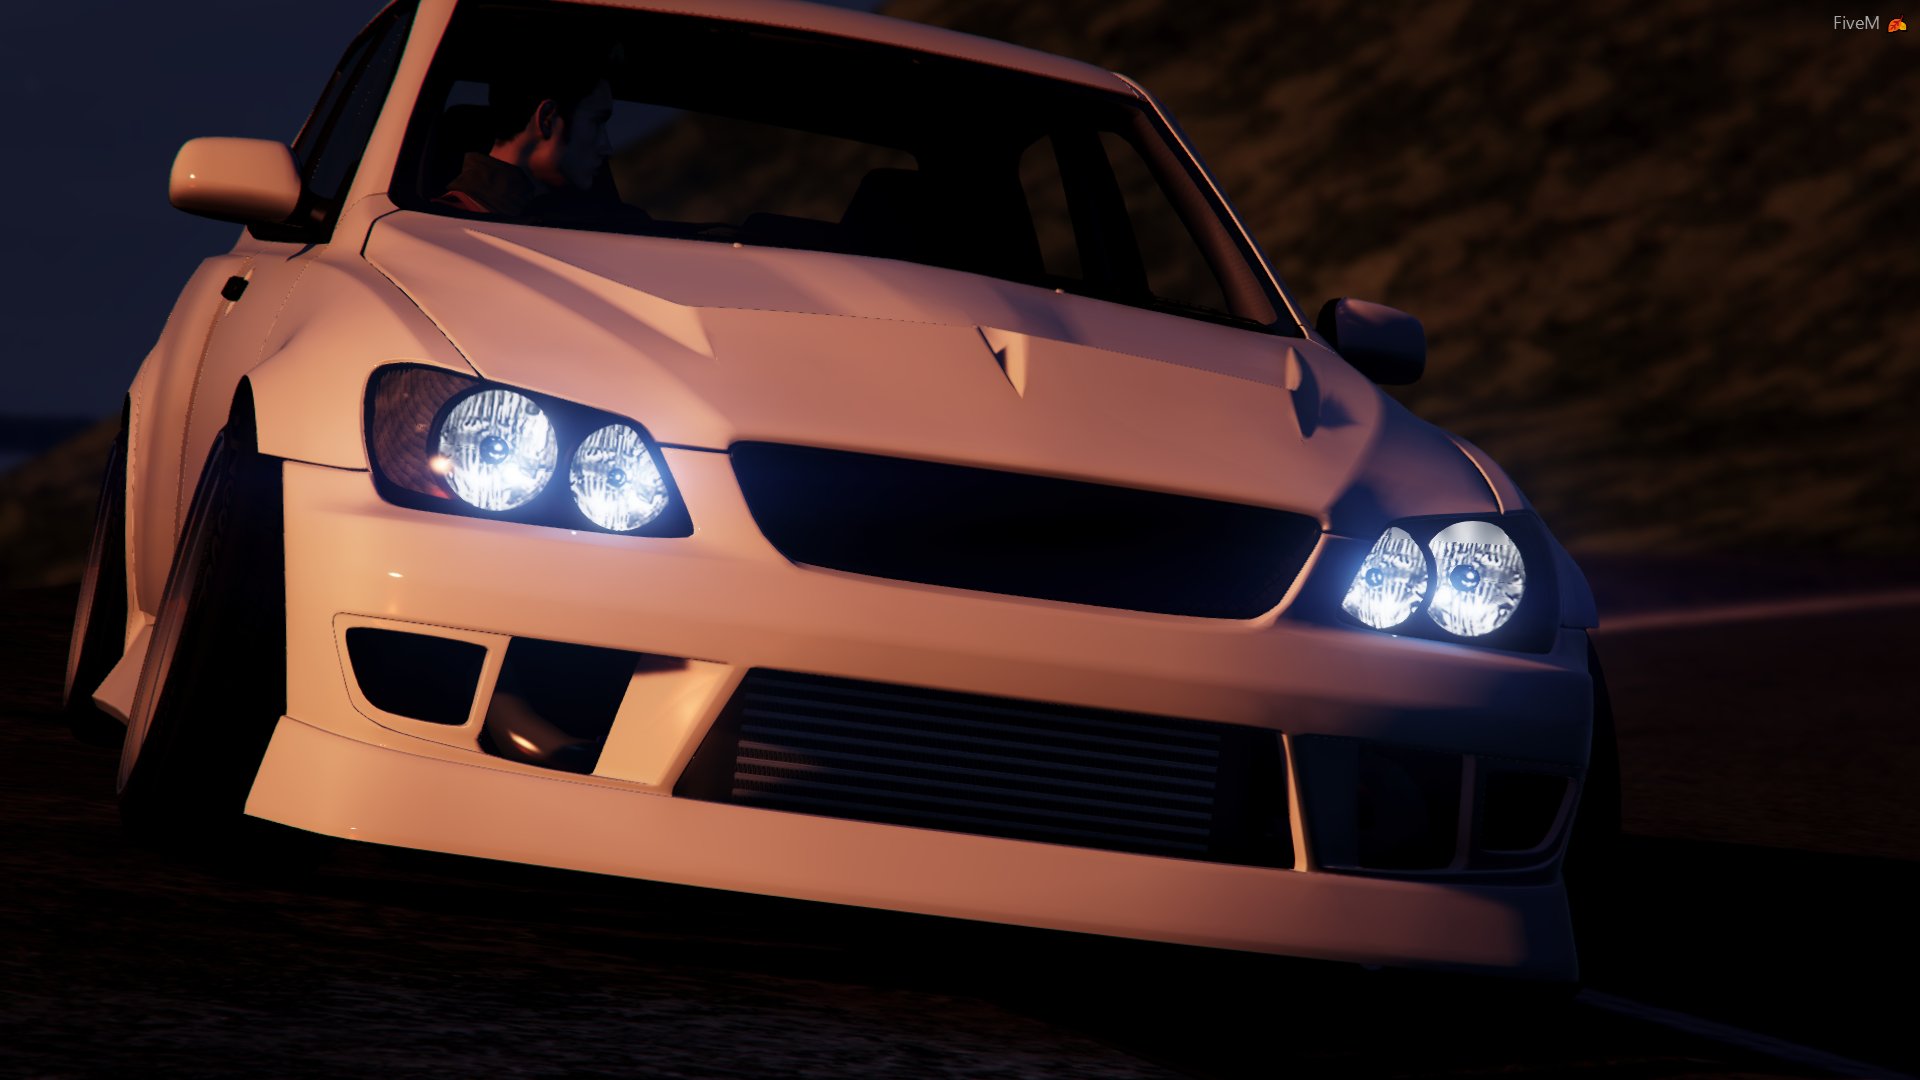 Sceptre Gaming On Some Amazing Gta Photos If Only Forza